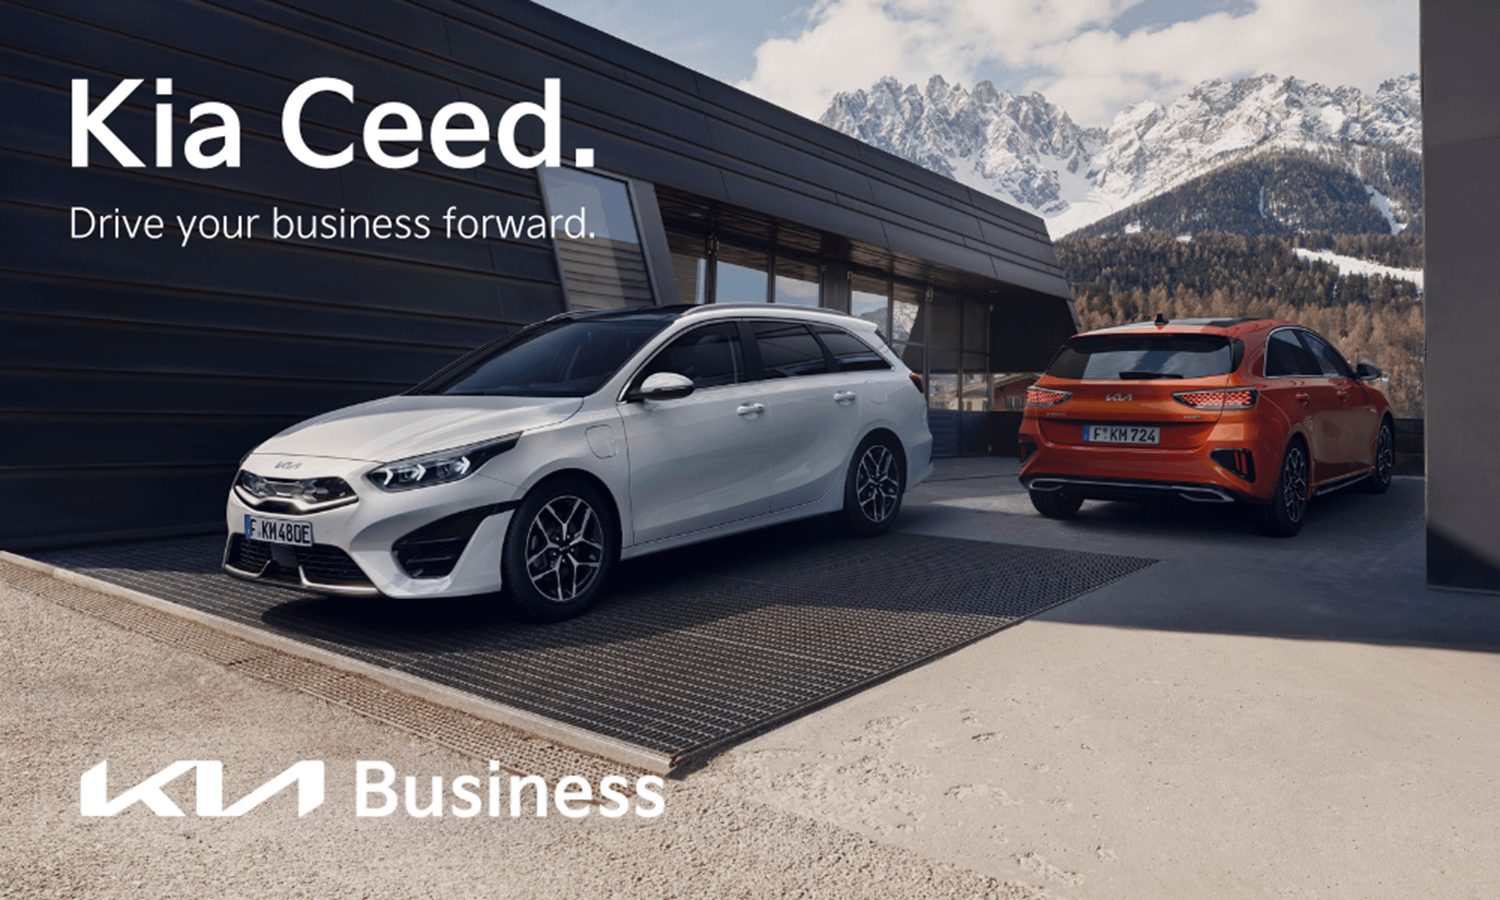 Kia Ceed and Ceed Sportswagen for business users